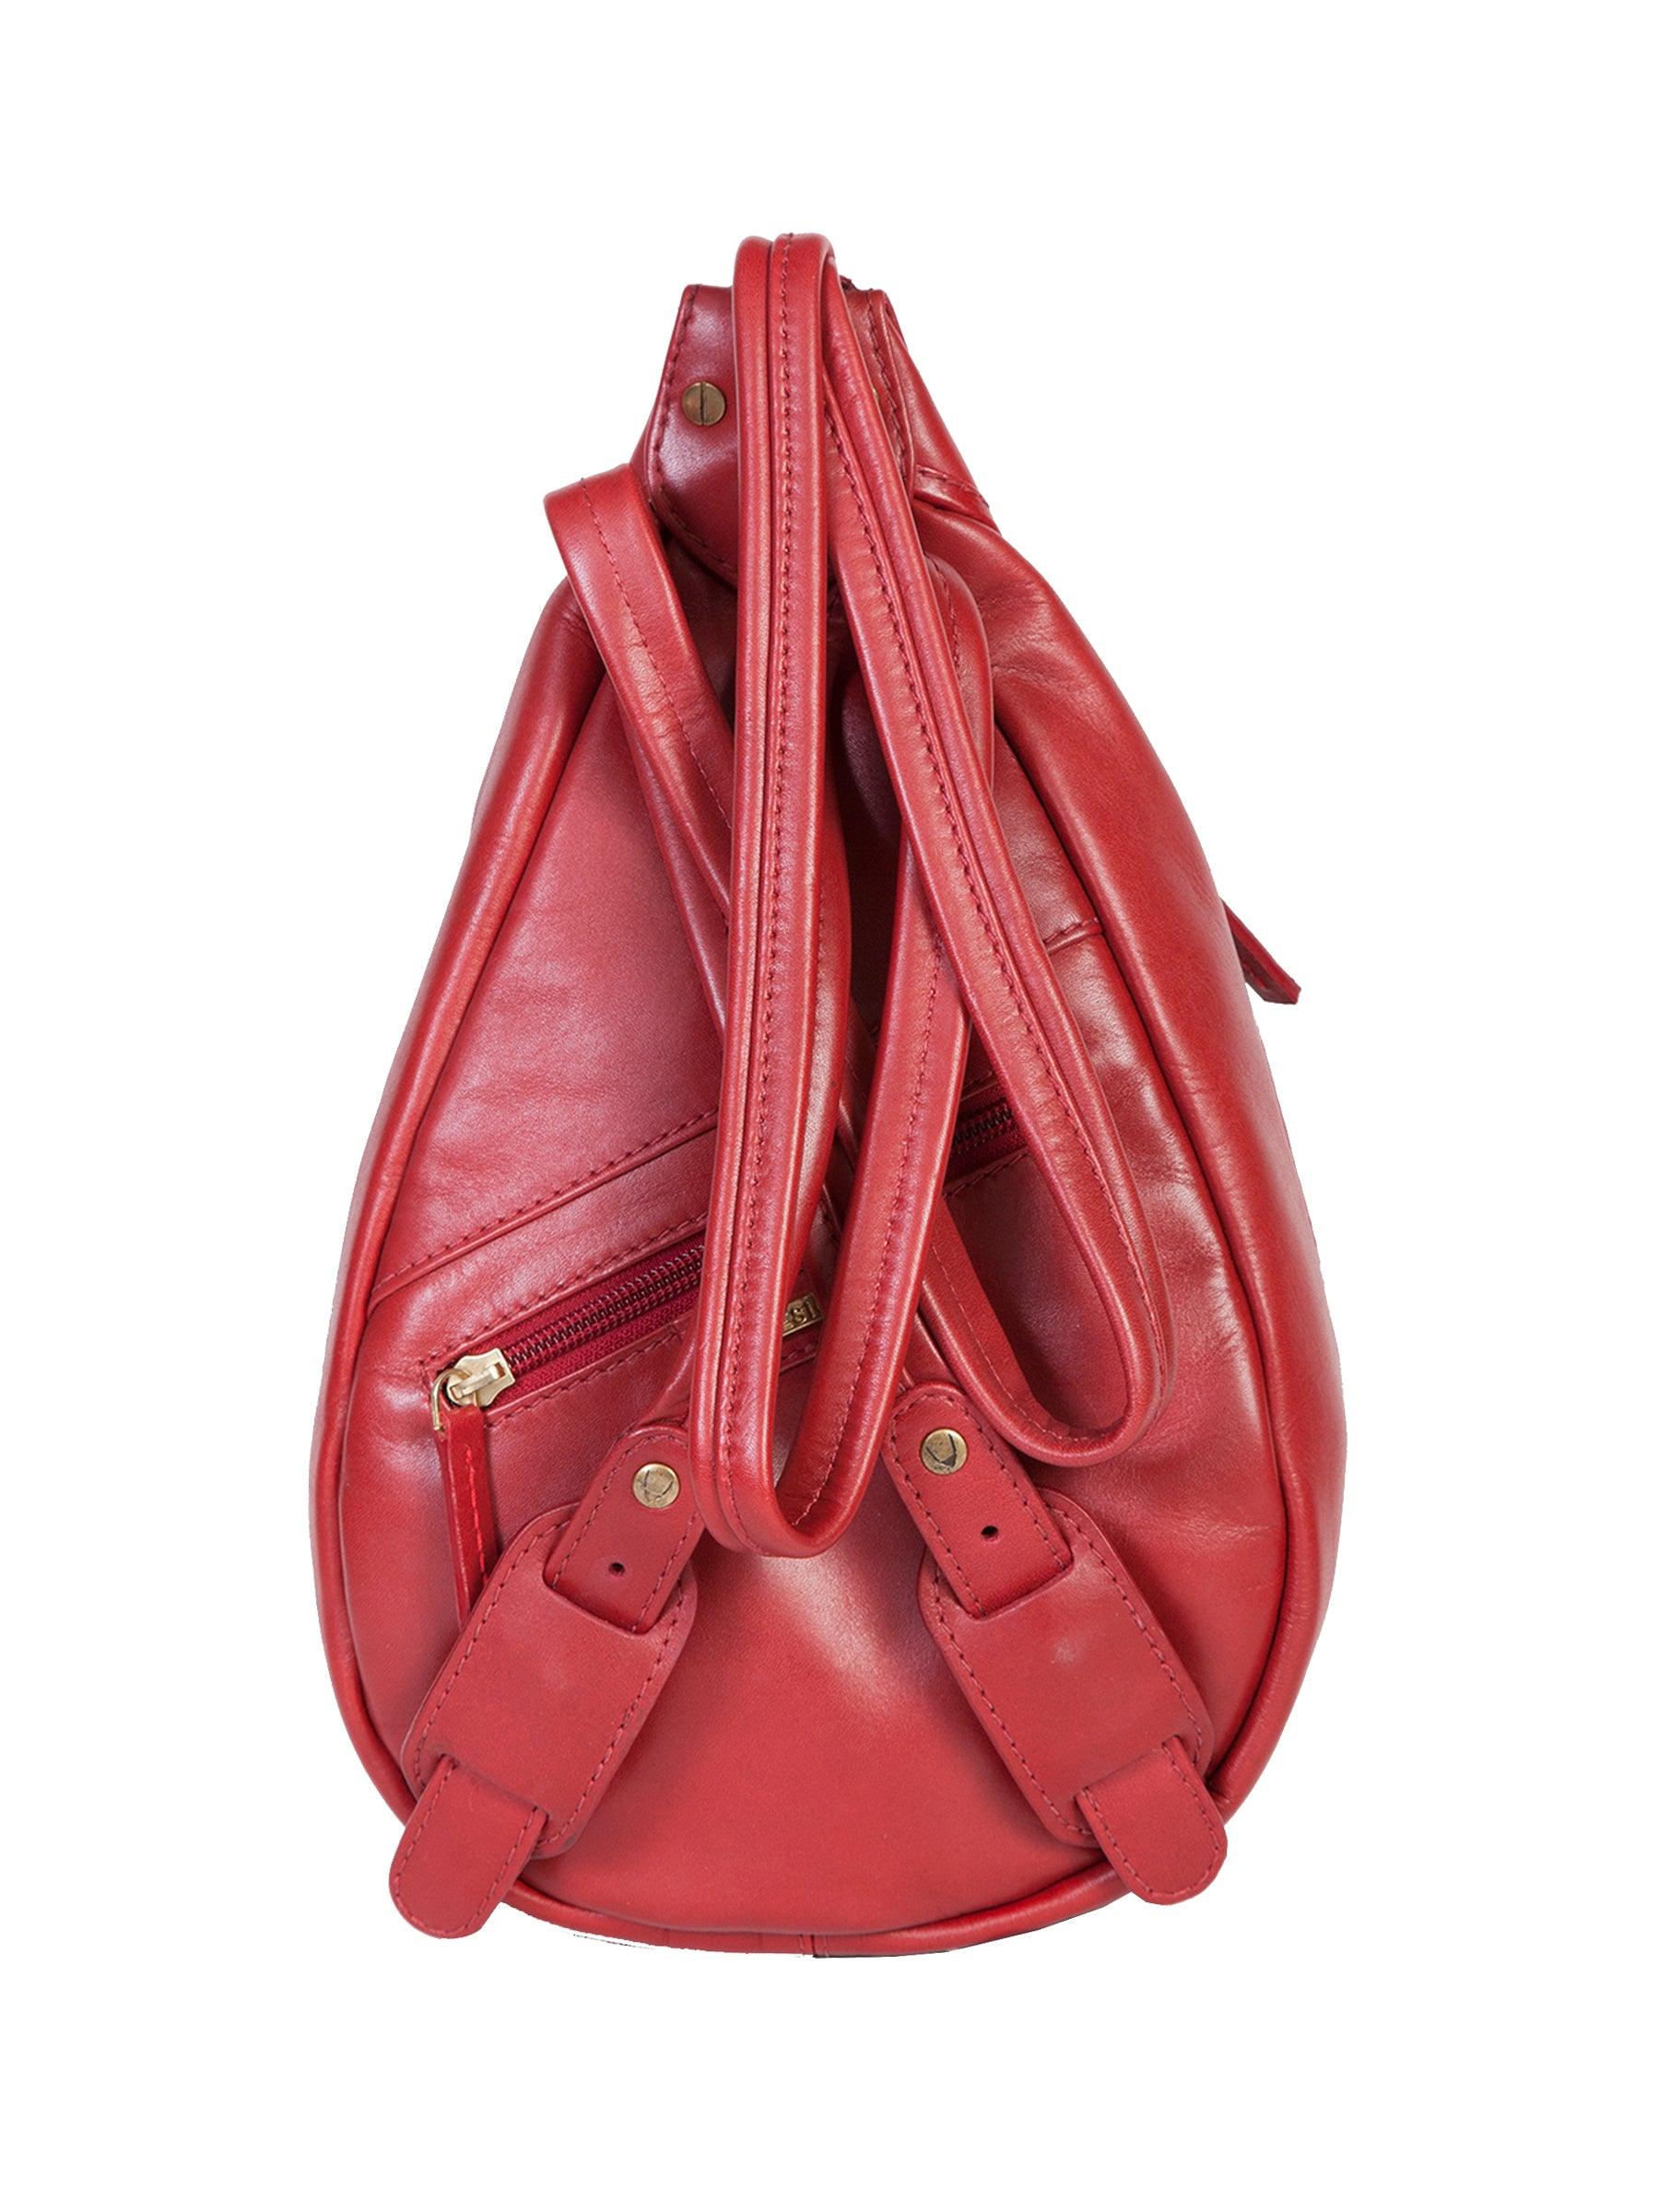 Scully RED BABY RUCKSACK SLING - Flyclothing LLC